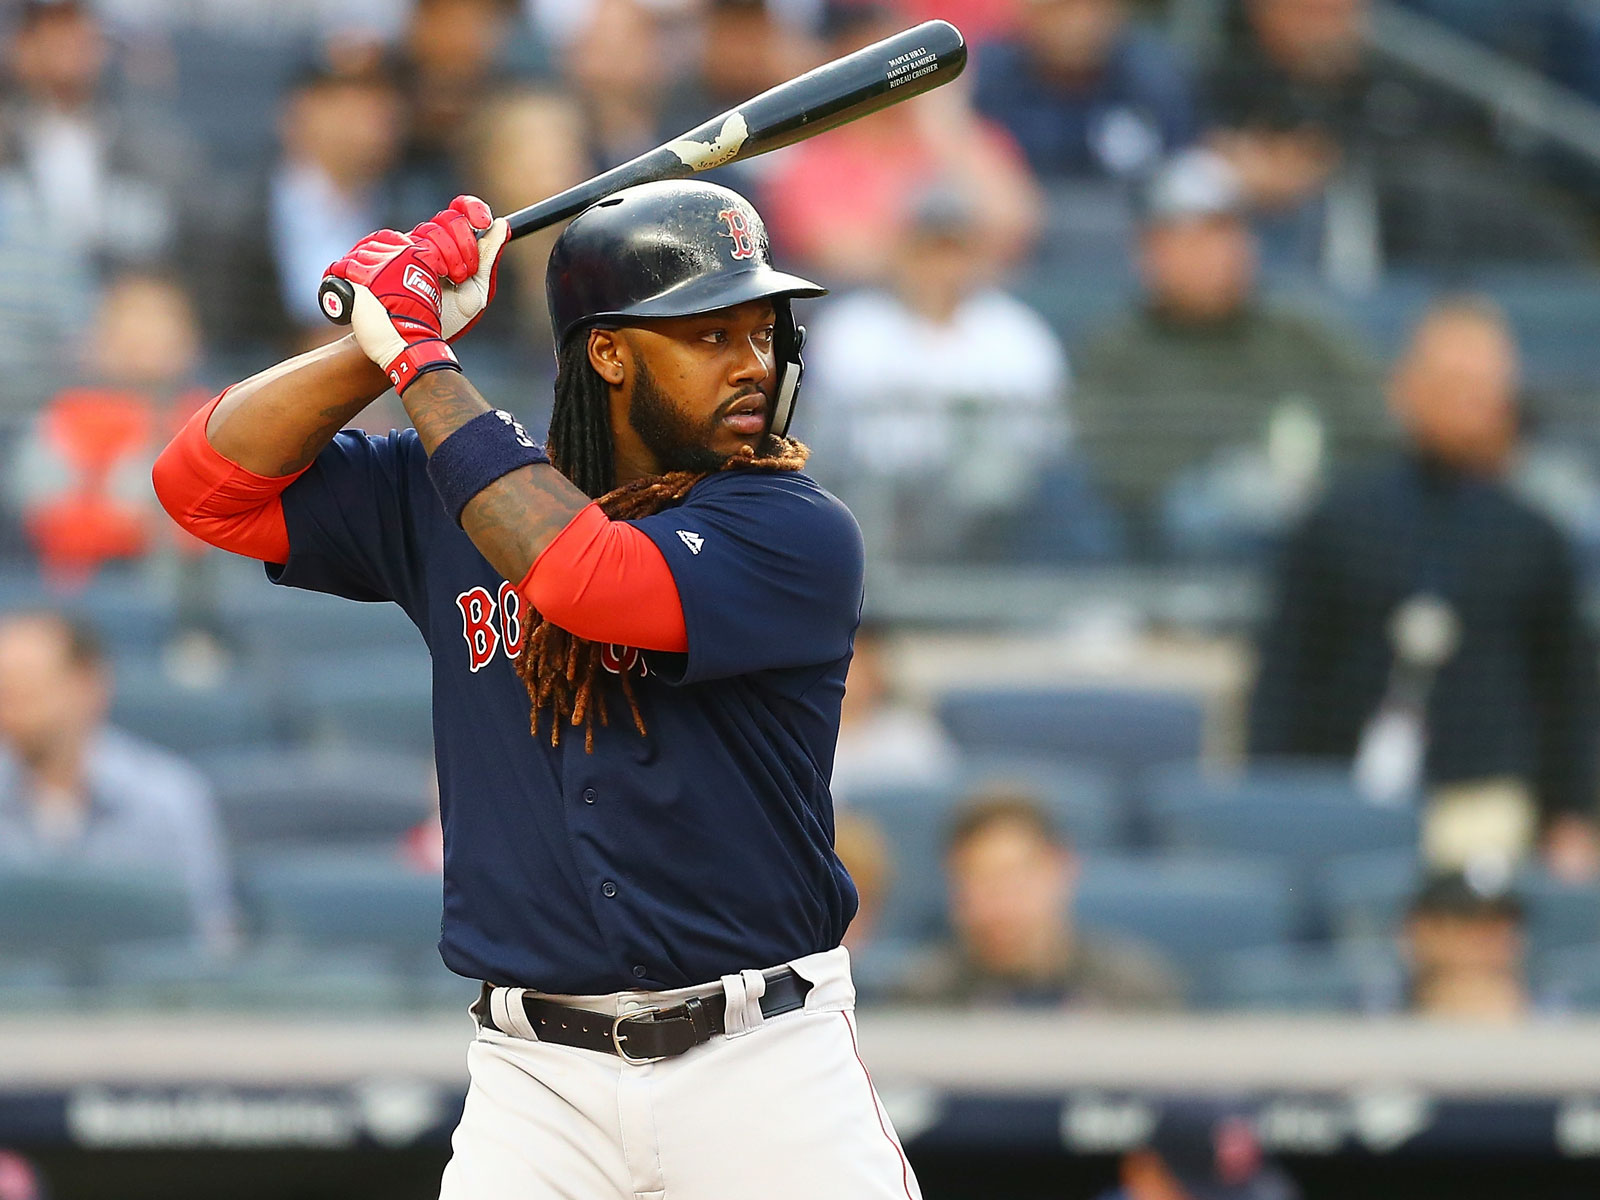 The Red Sox Lost Patience With Underwhelming Hanley Ramirez